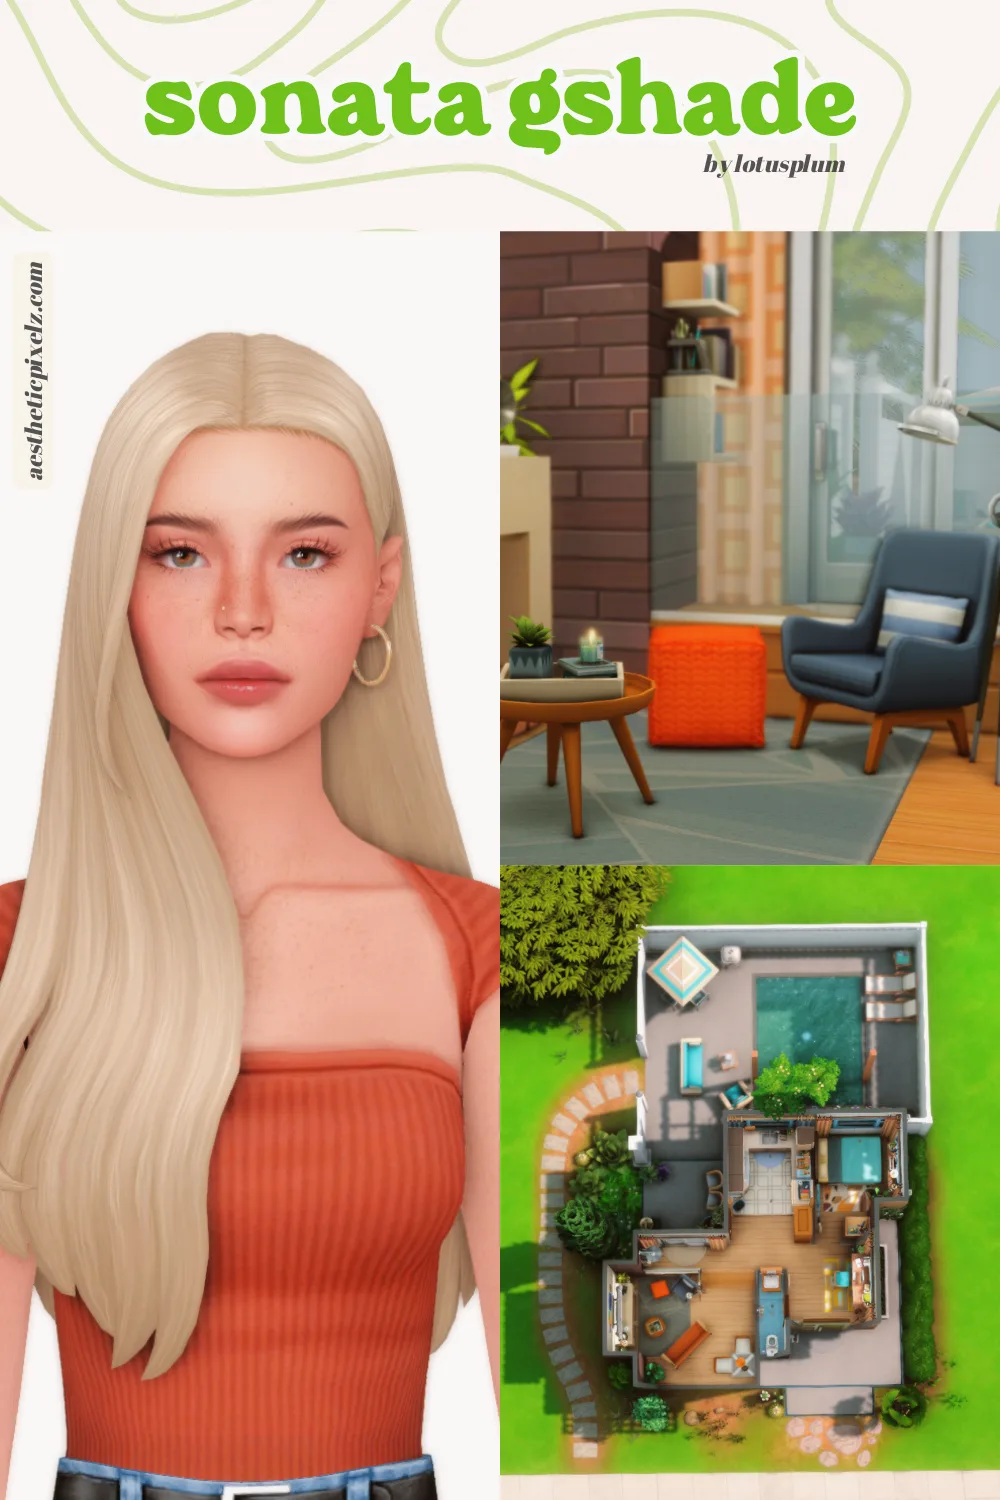 images showing off the sonata gshade for the sims 4